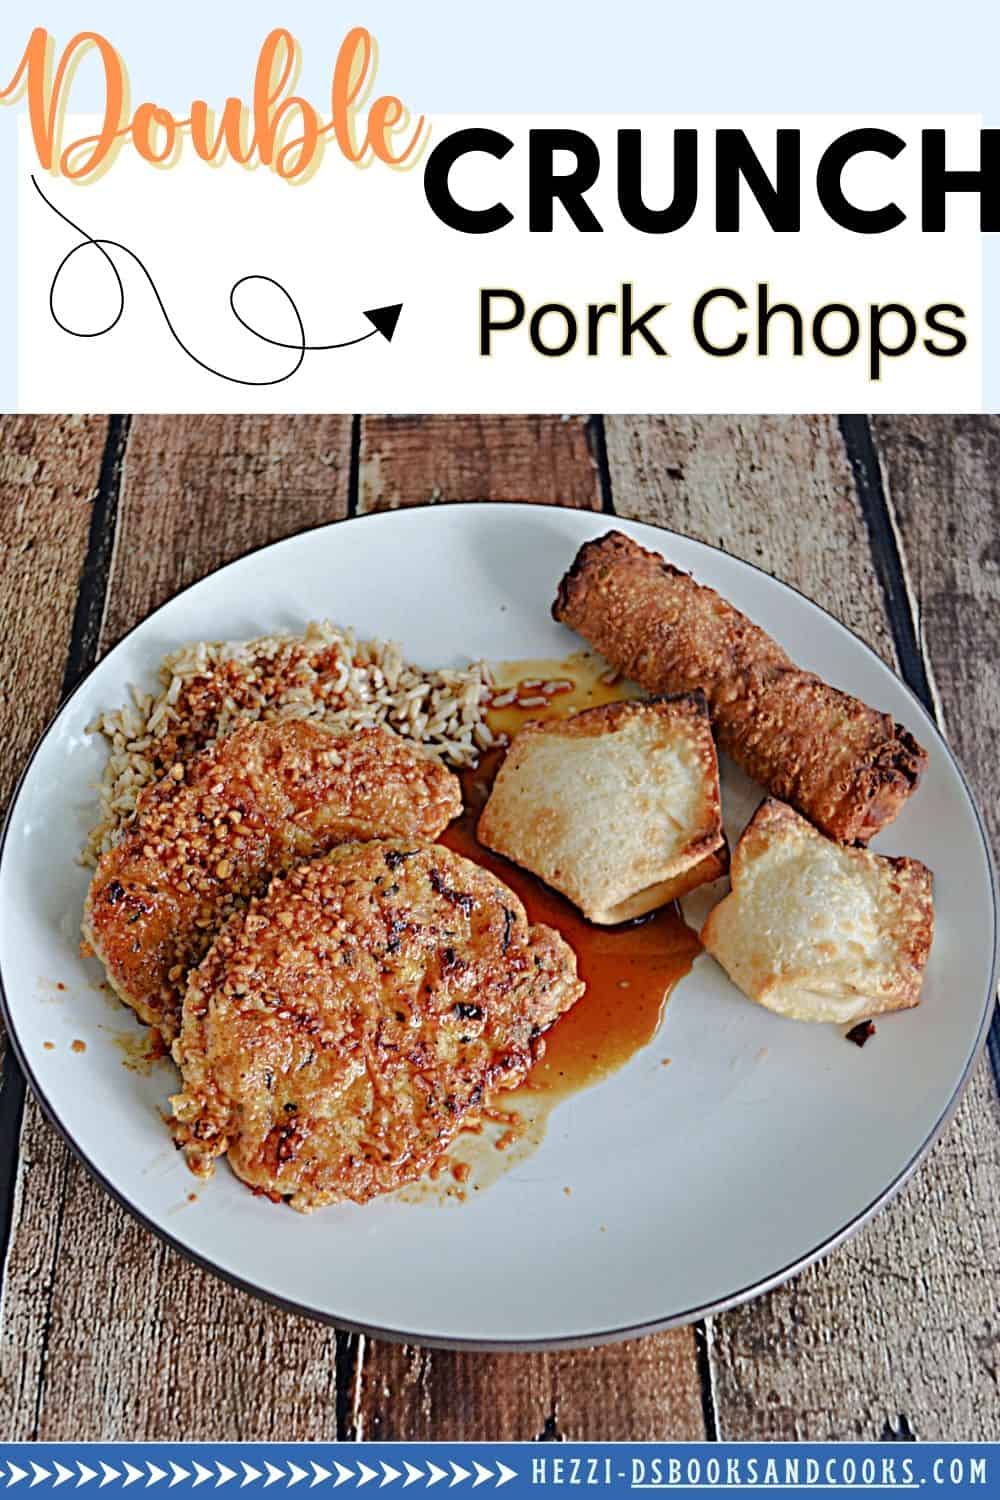 Pin Image: Text title, a plate of pork chops over top of rice with wontons and an egg roll.